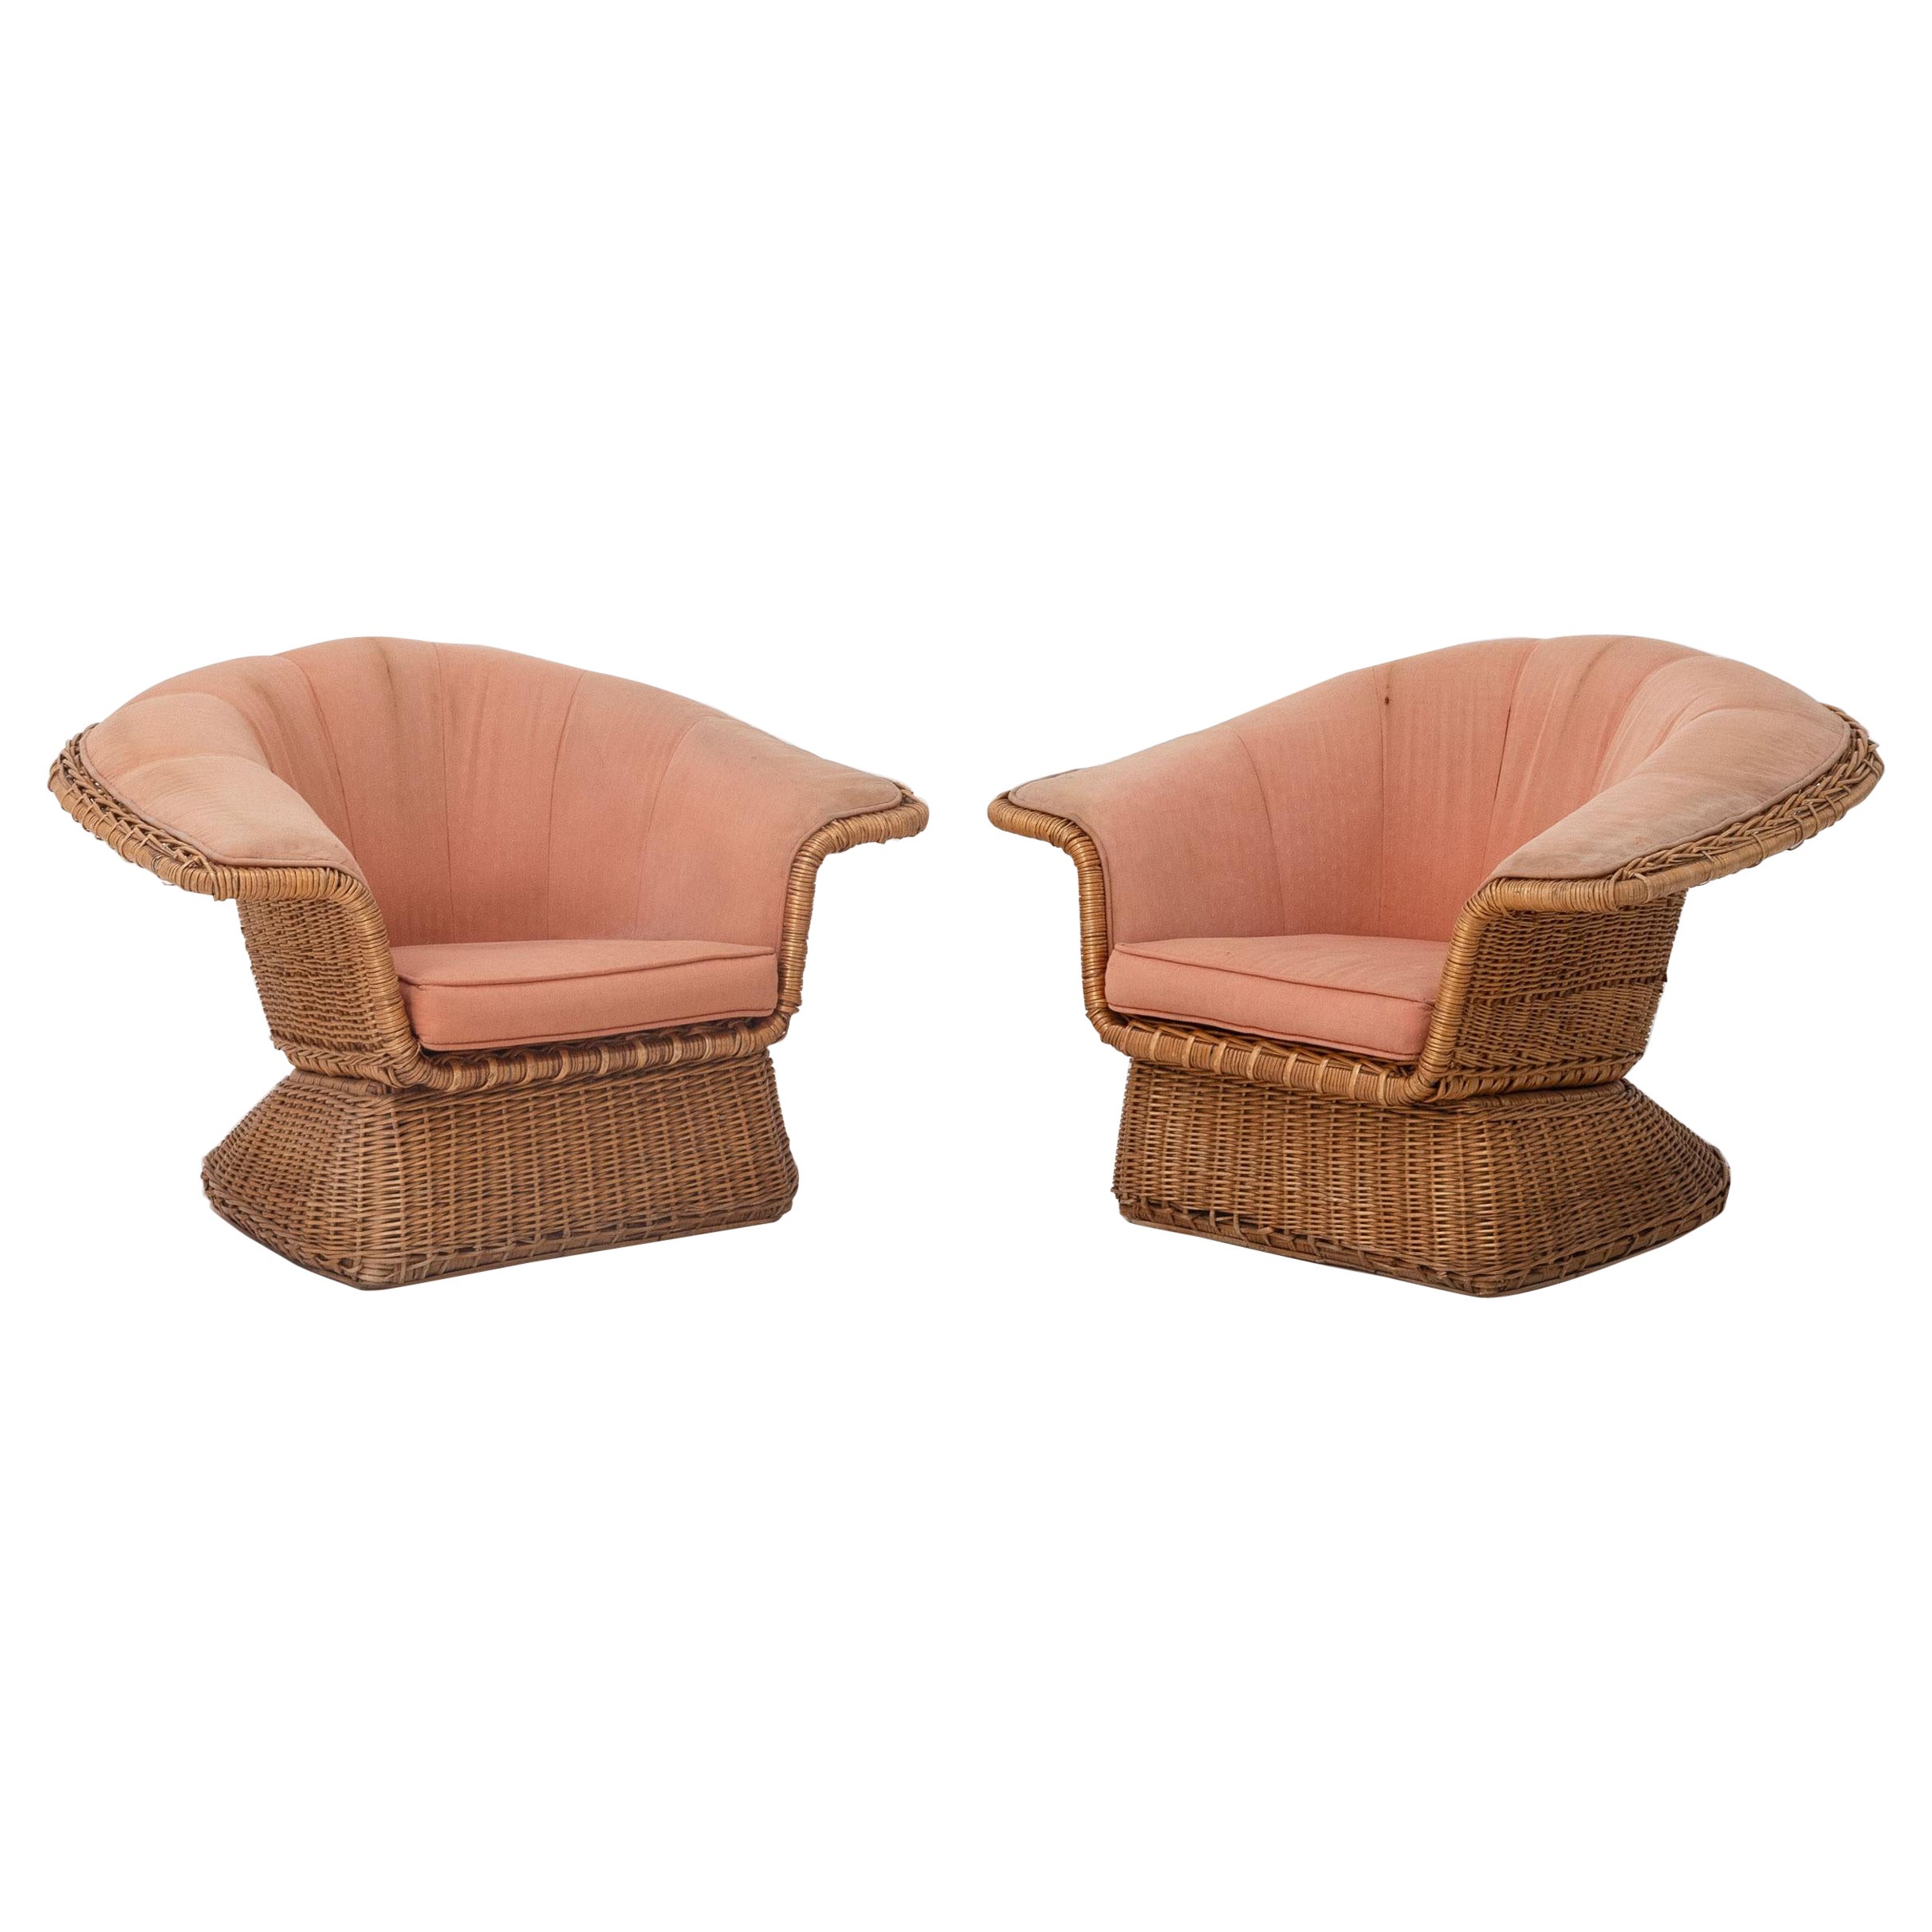 A Pair of Wicker Armchairs by Lyda Levi for McGuire, c.1970 For Sale